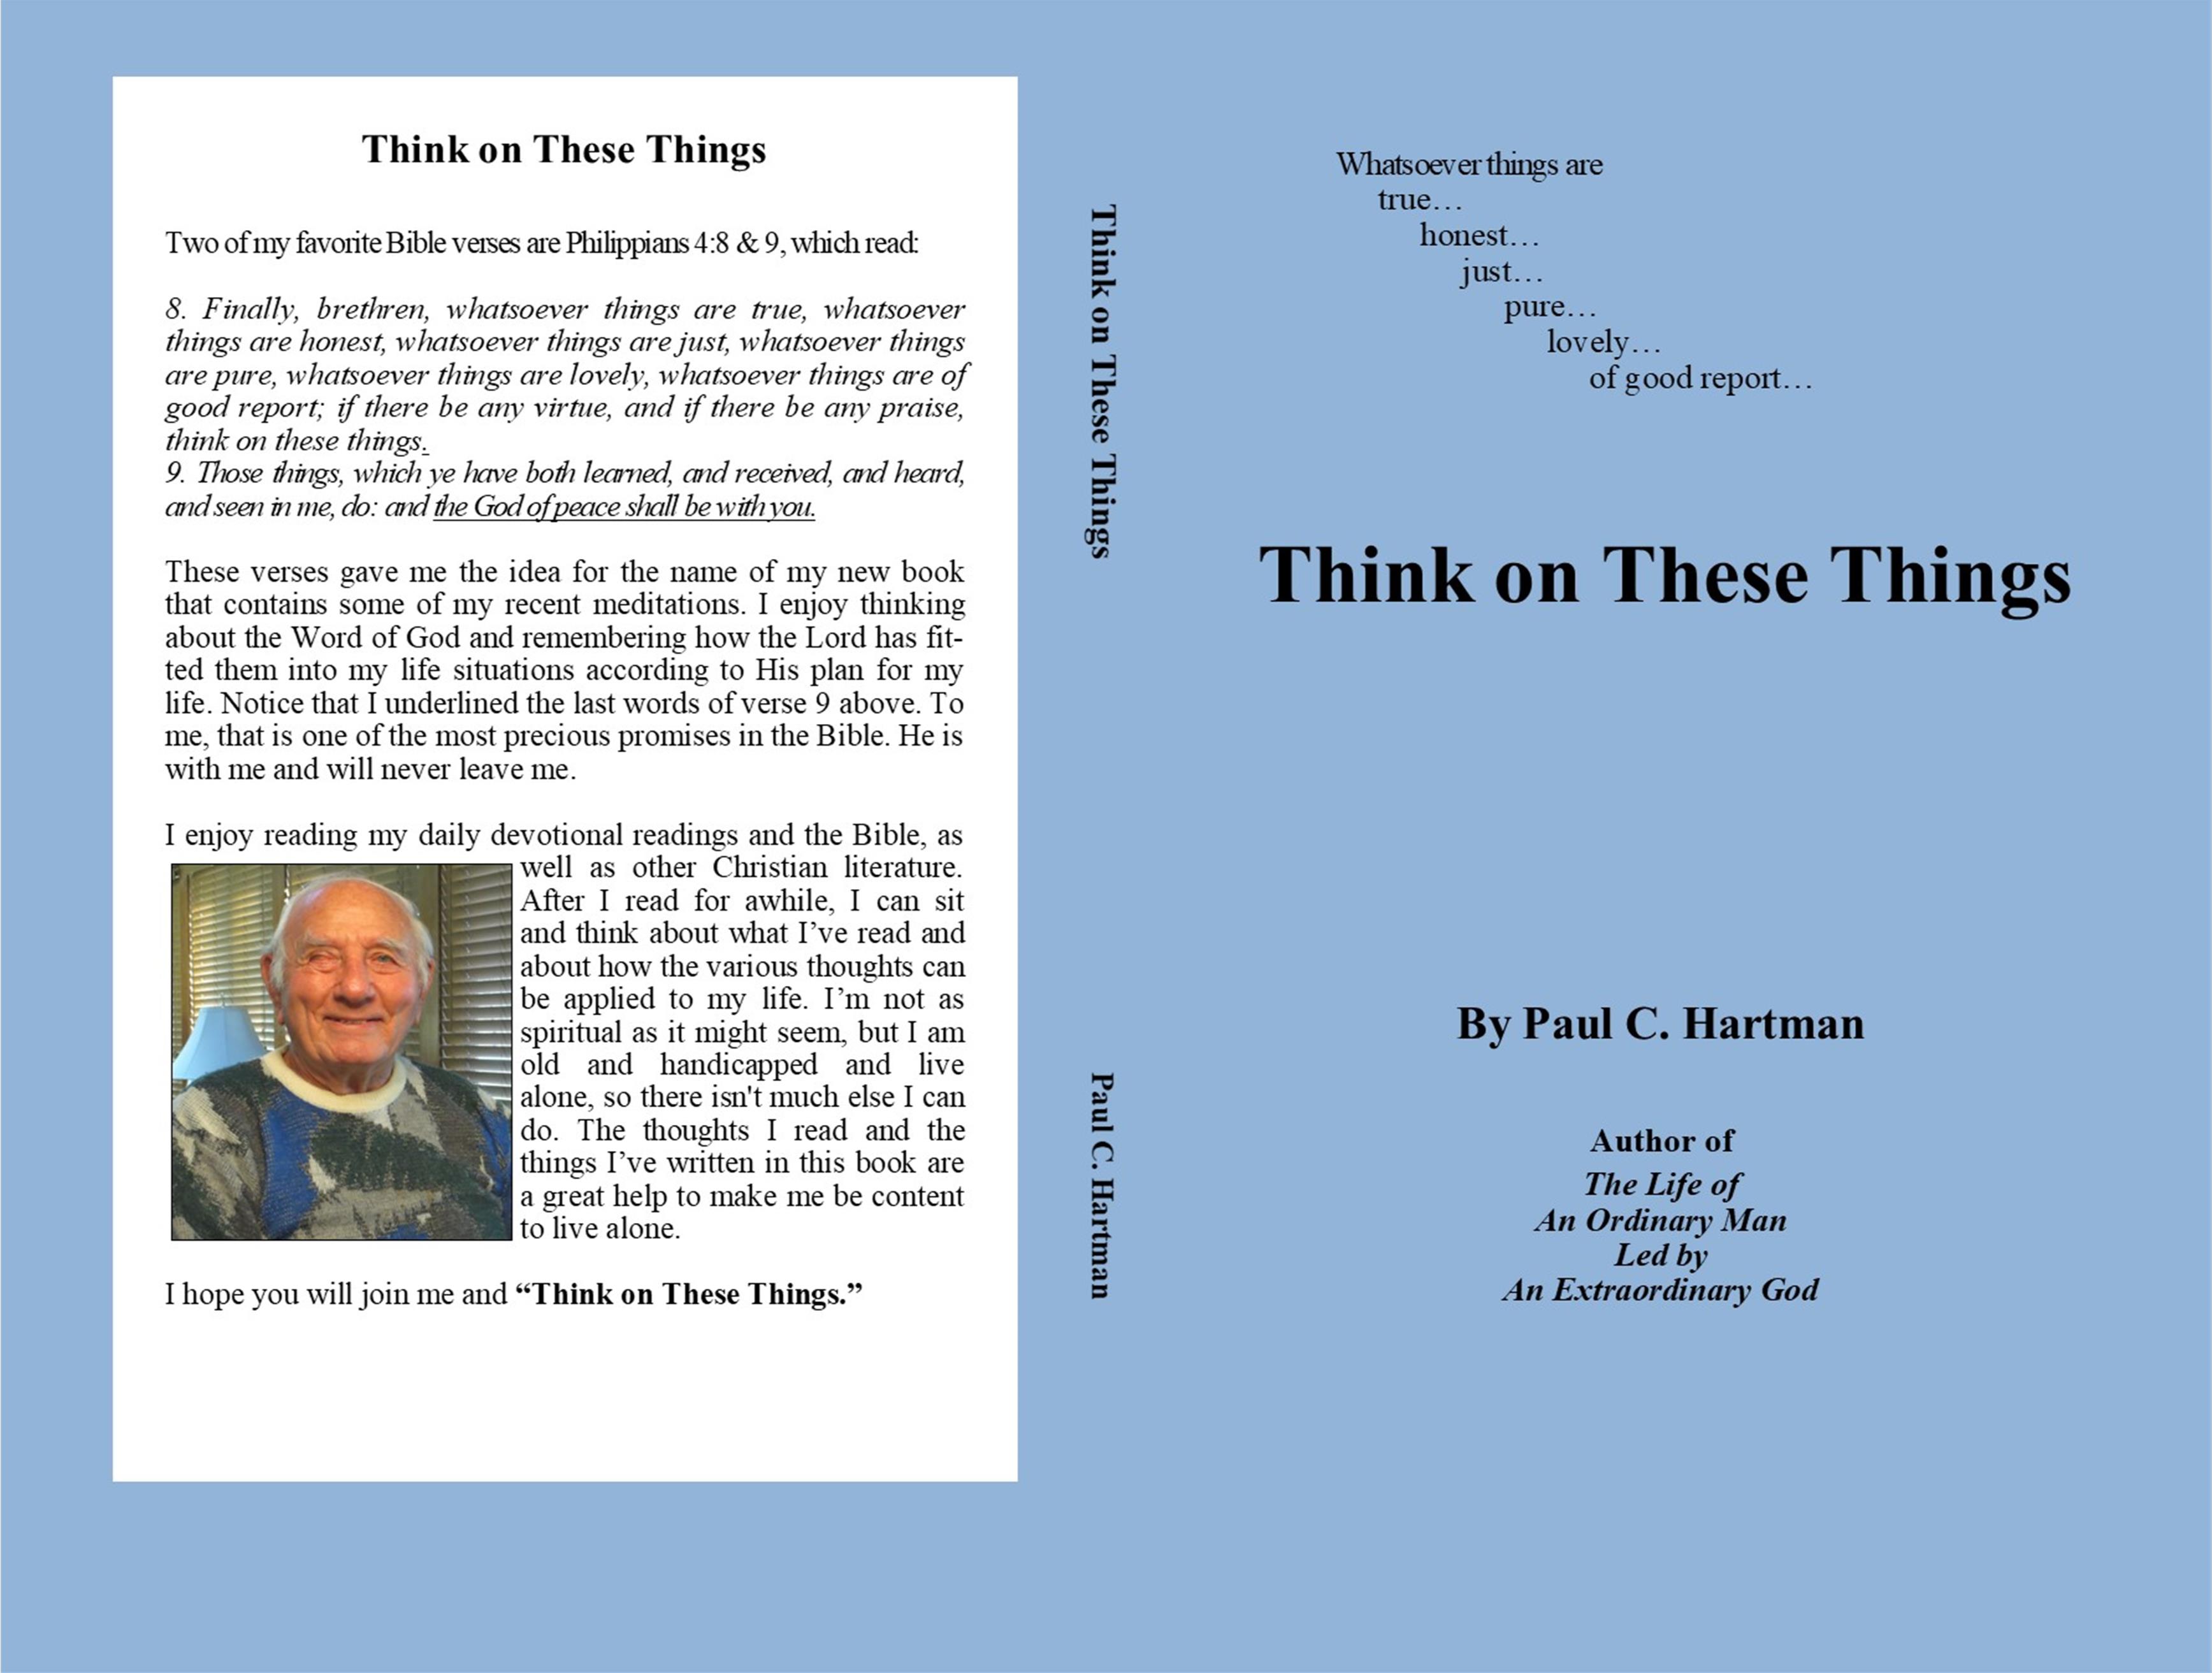 Think On These Things - Final cover image